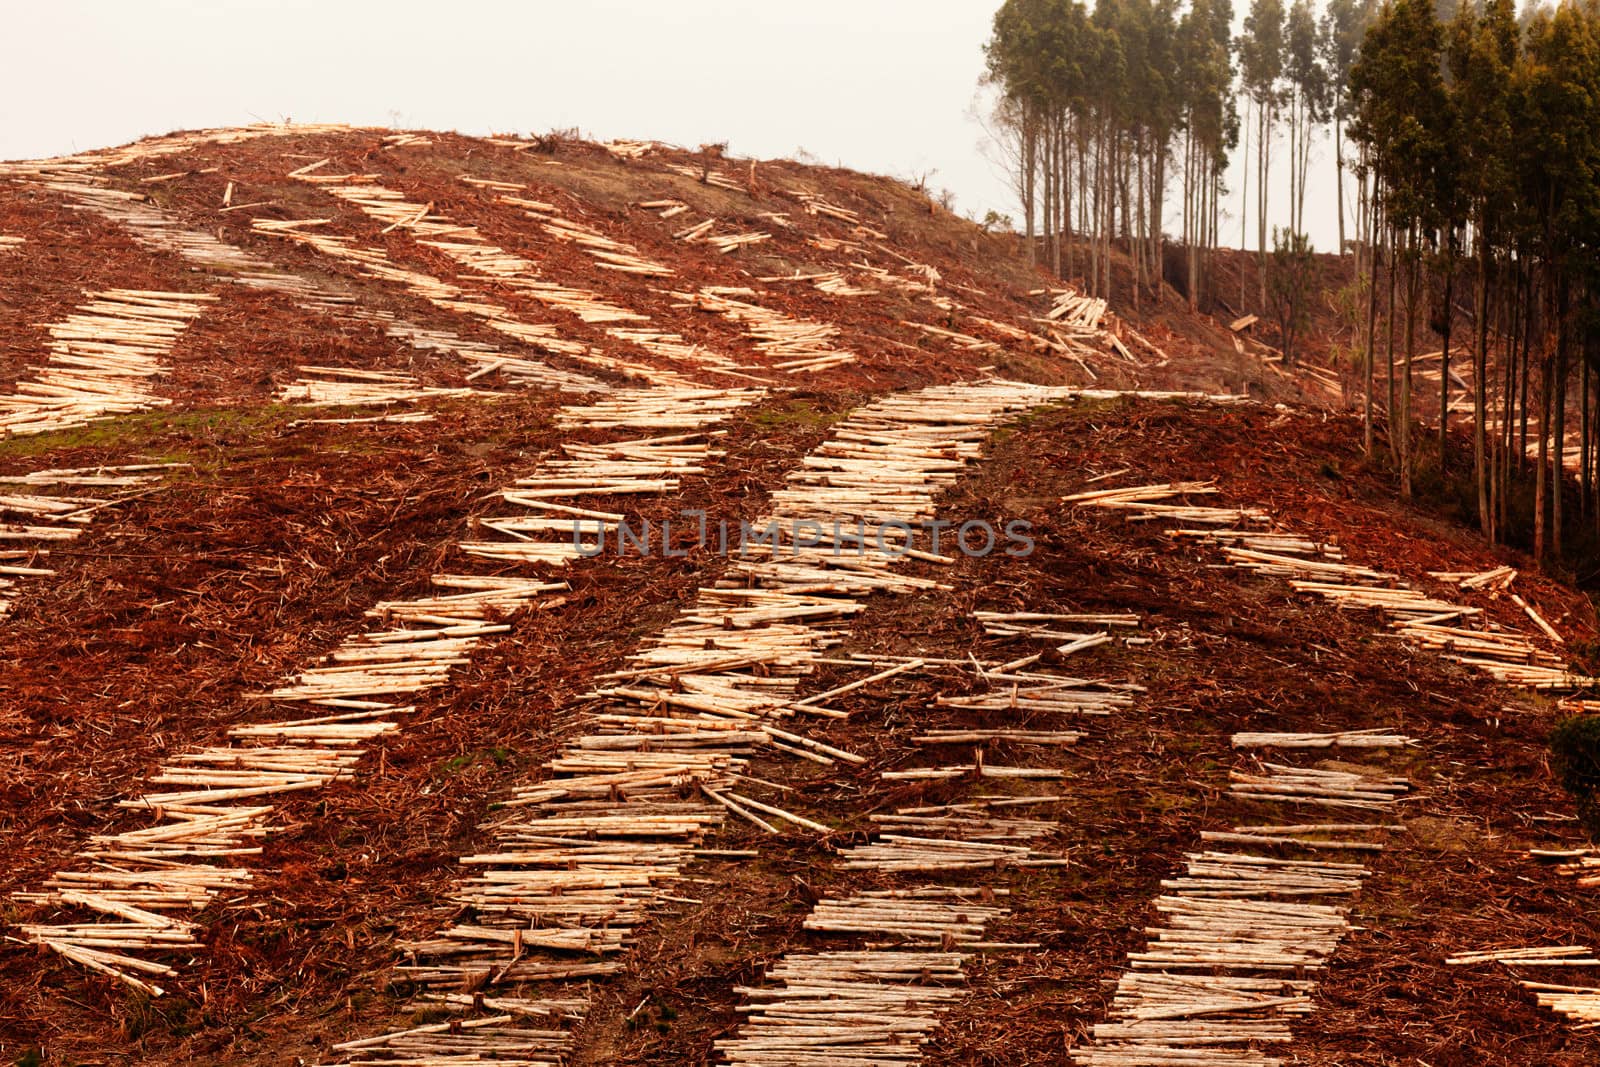 Deforestation of hillside by clearcutting mature Eucalyptus forest for timber harvest